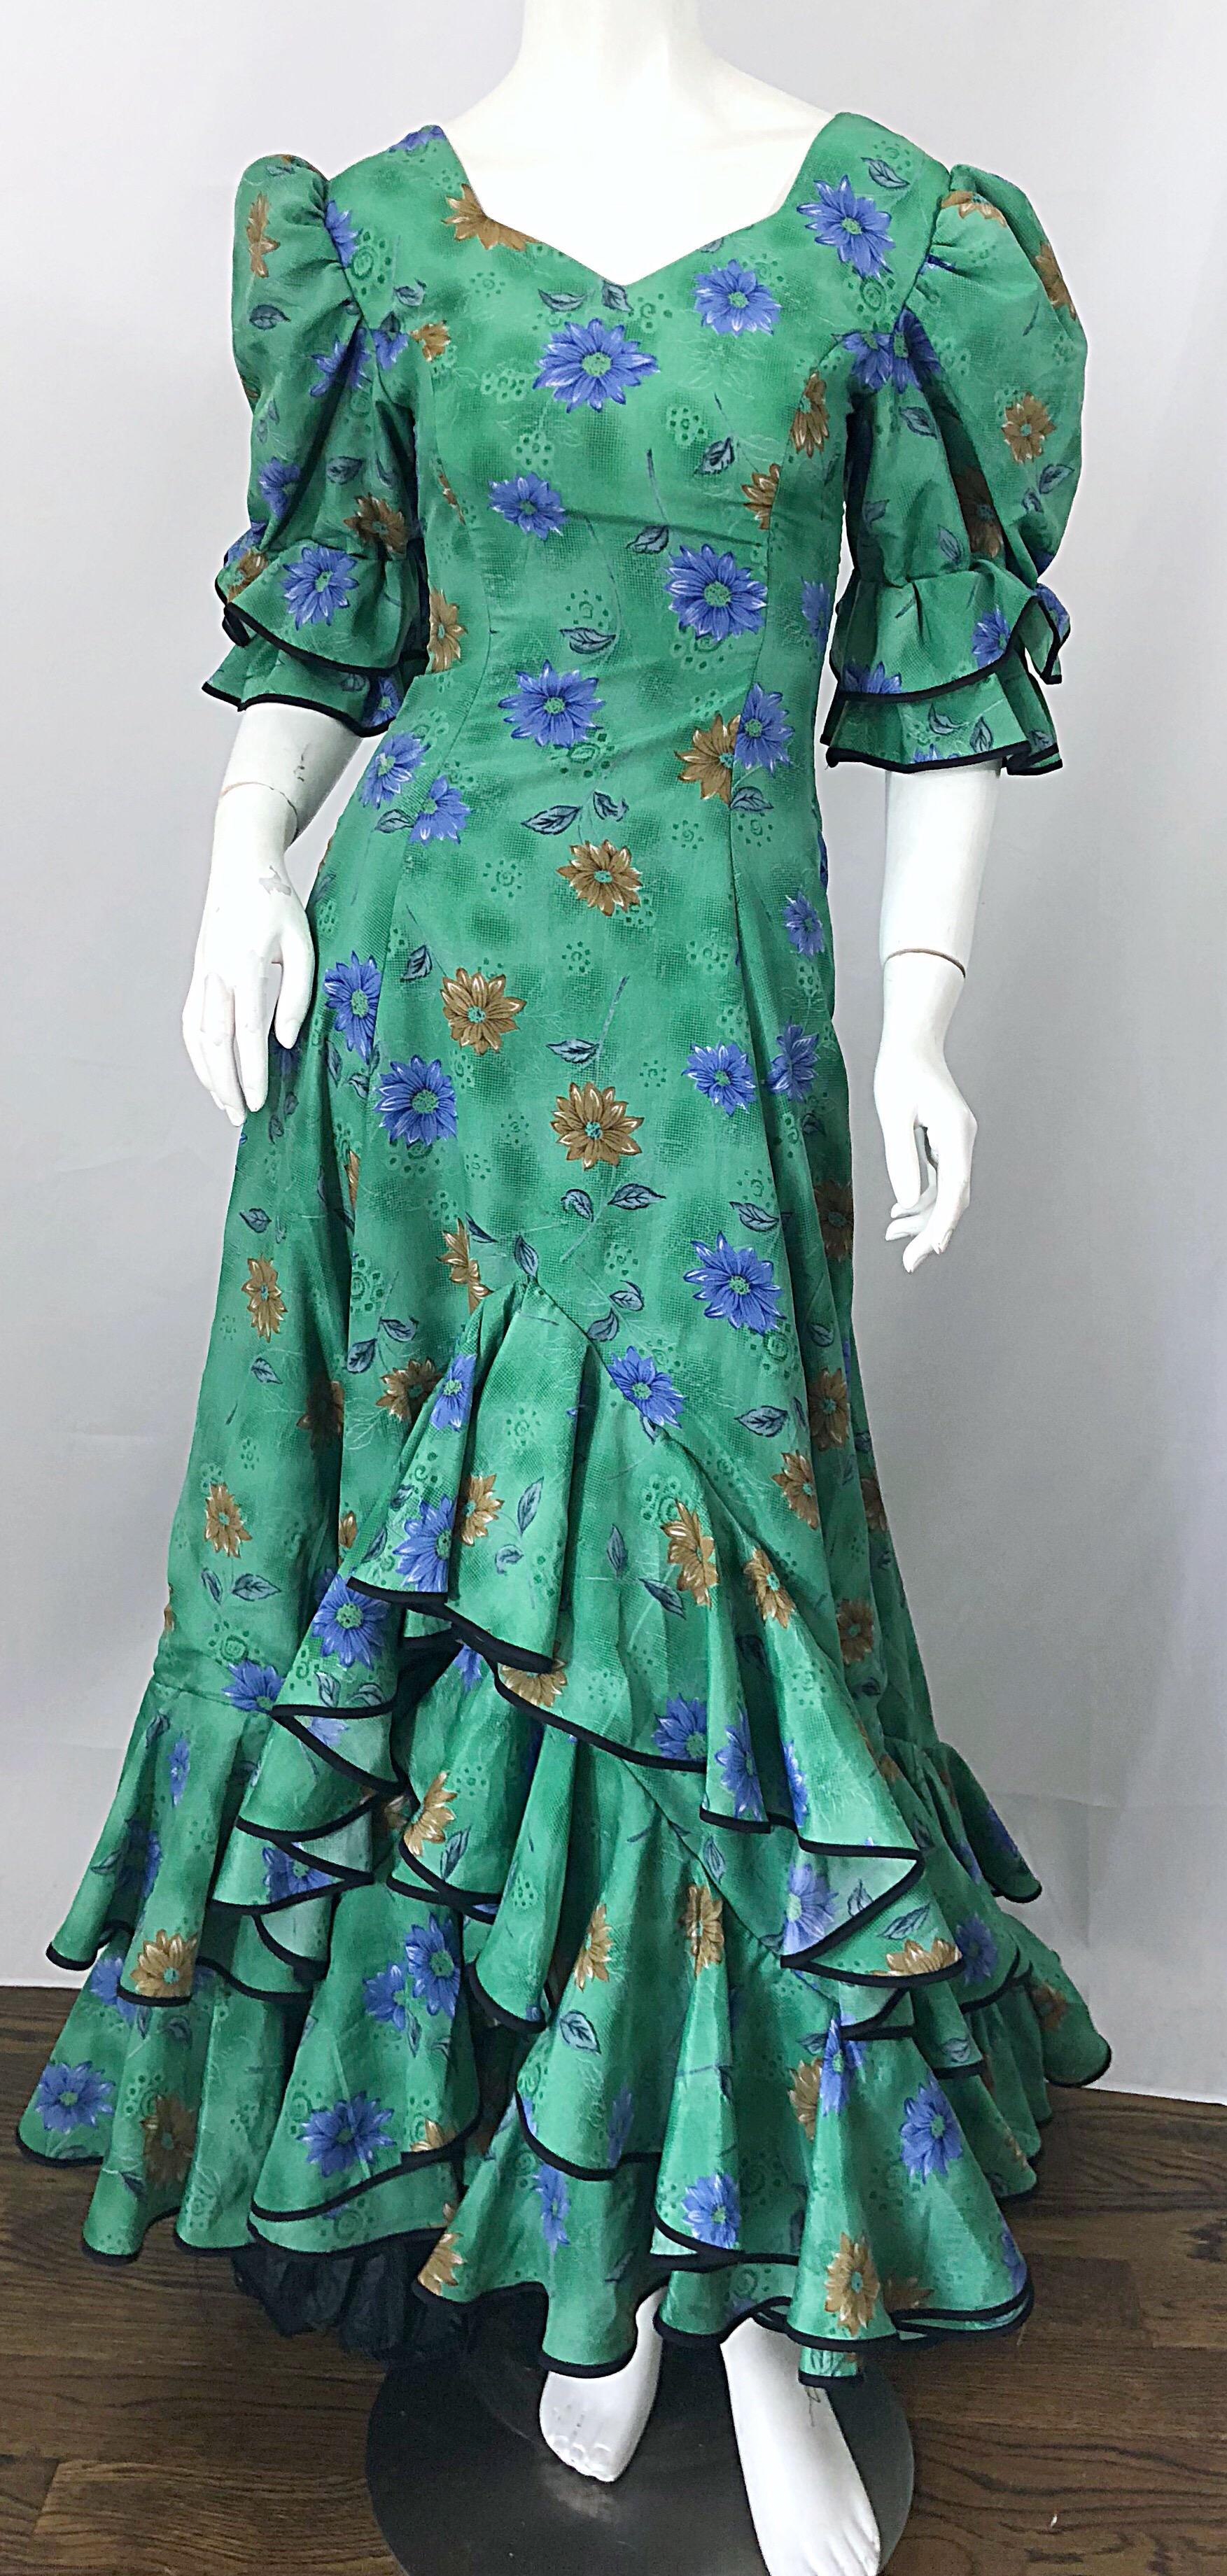 Amazing vintage Victorian inspired 70s does 1800s green steampunk trained dress! Features a beautiful color of green with blue and brown flowers throughout. Chic puff sleeves and a dramatic long ruffle train hem. Ruffles at hem and at each sleeve